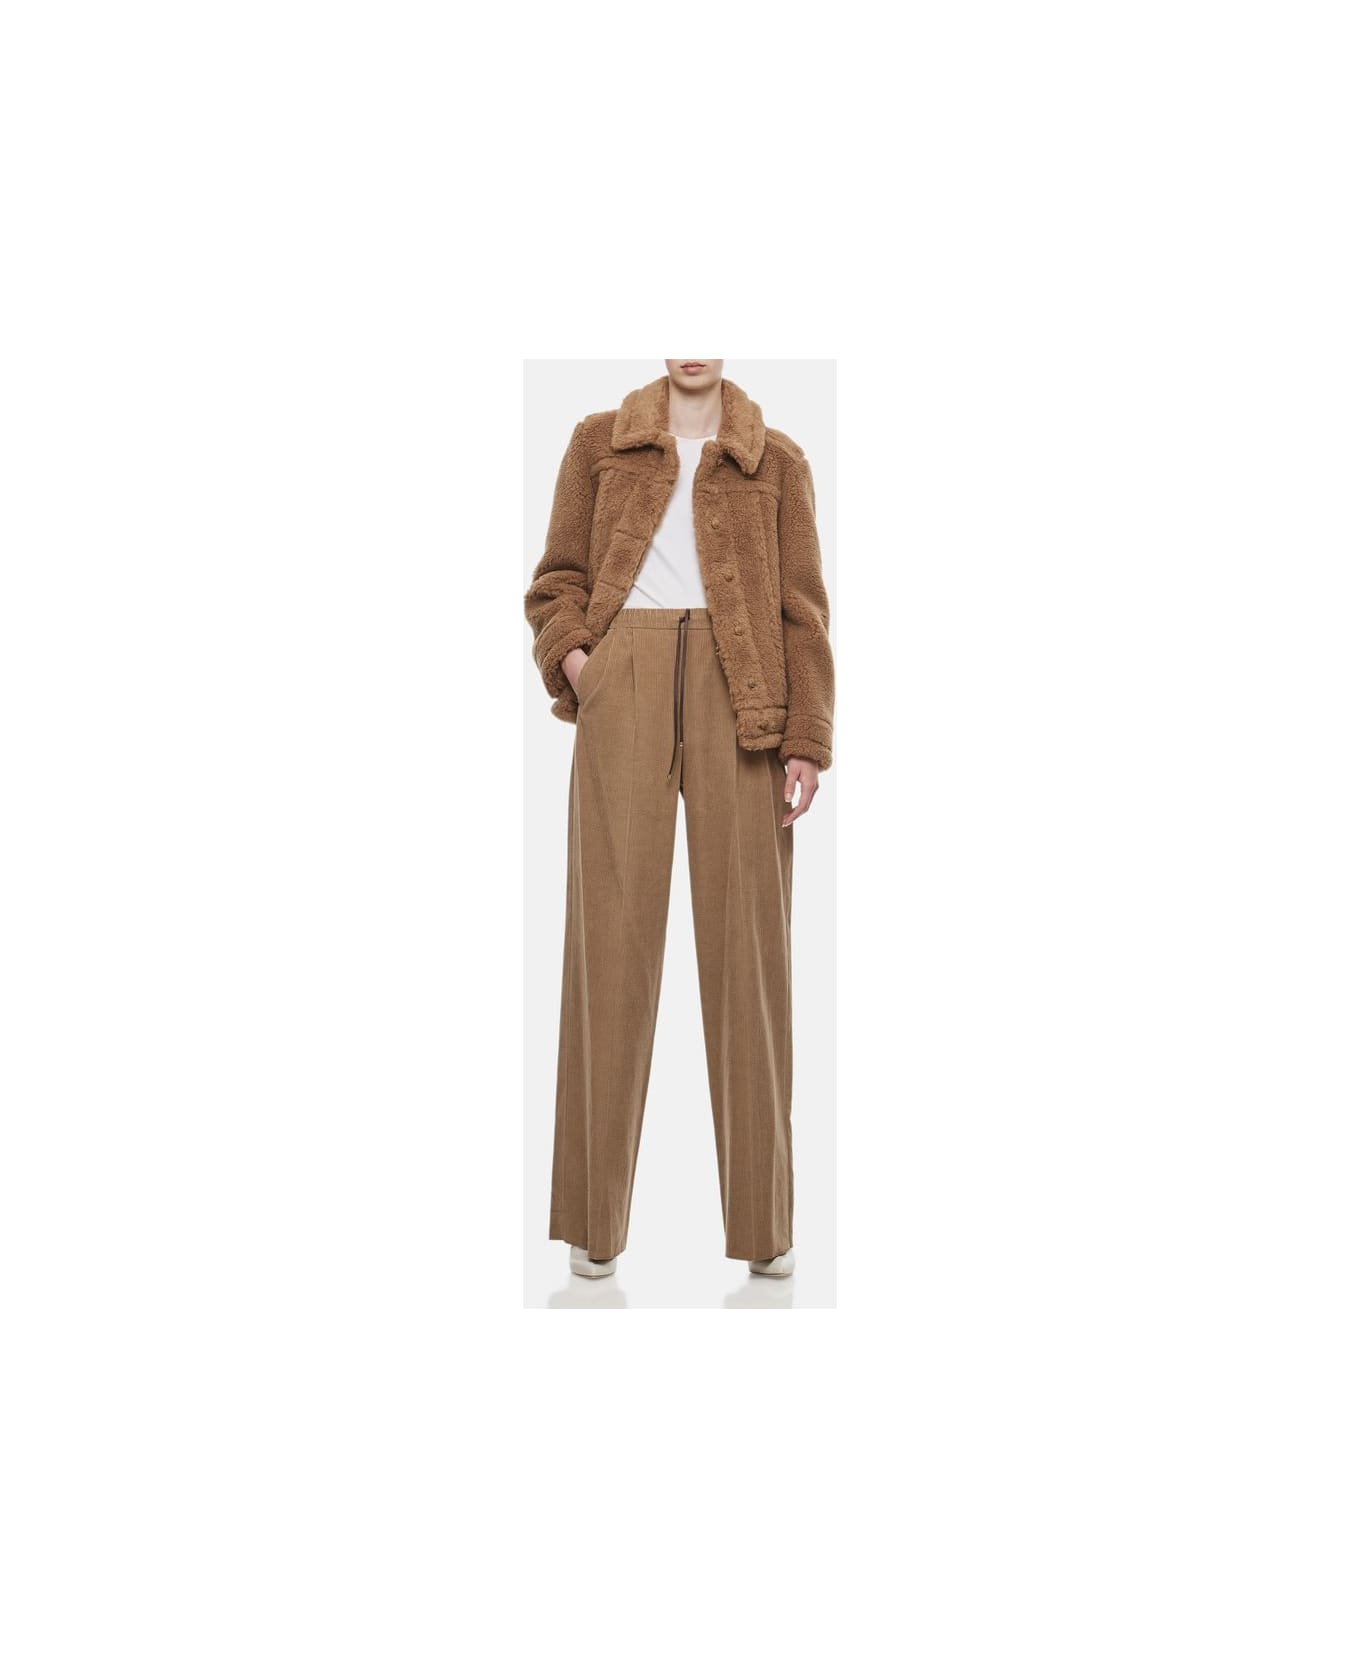 Max Mara Getto Velvet Trousers - Brown ボトムス